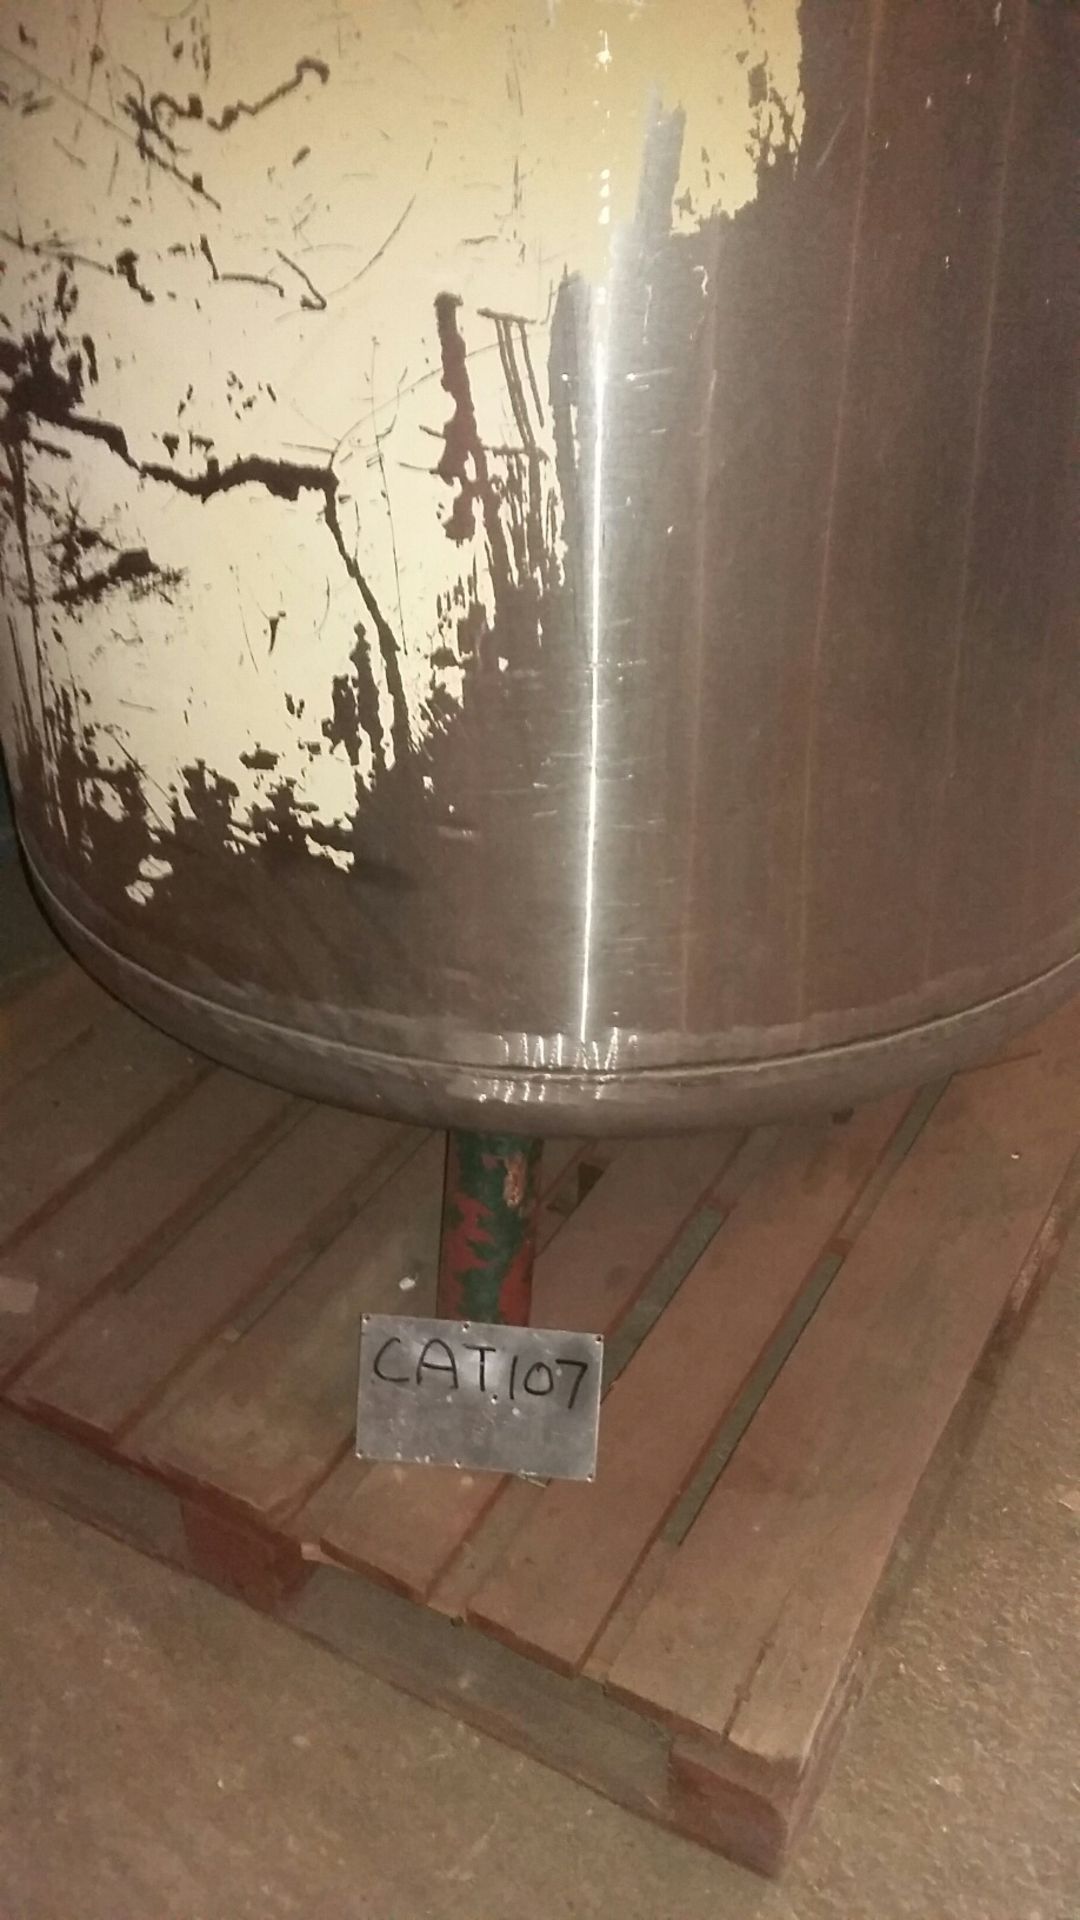 Grundy 800L Vertical Stainless Steel Tank, with ov - Image 2 of 3